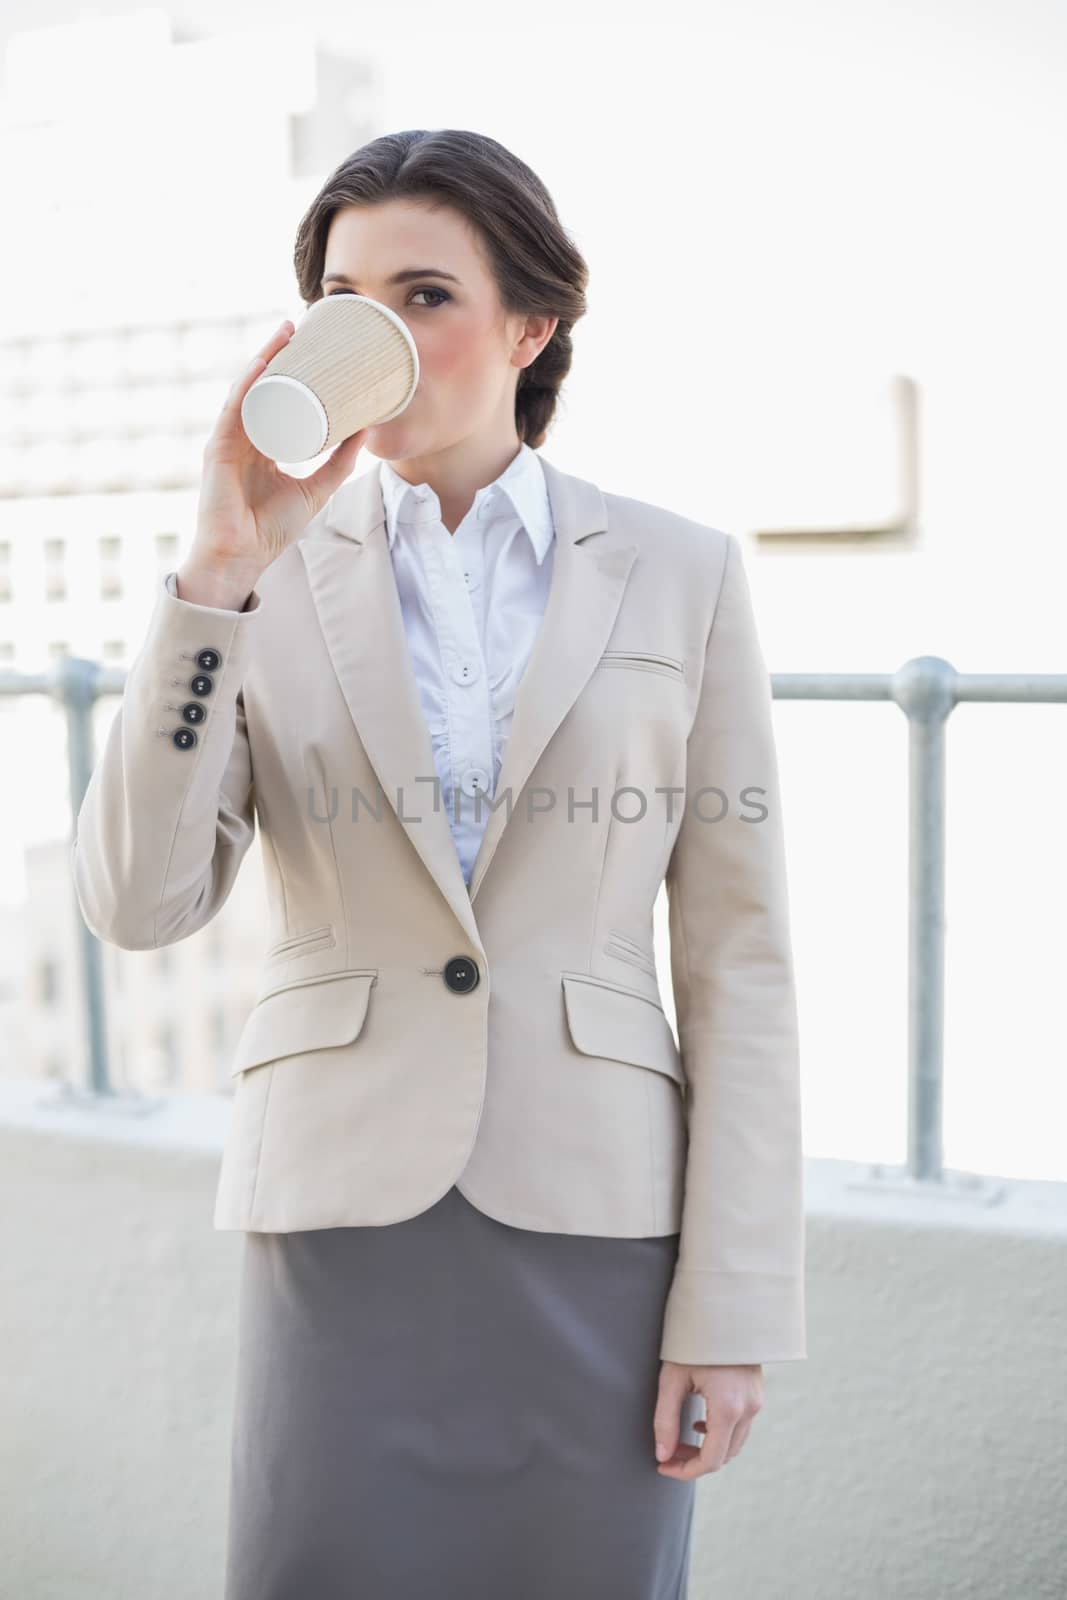 Calm stylish brown haired businesswoman drinking coffee outdoors